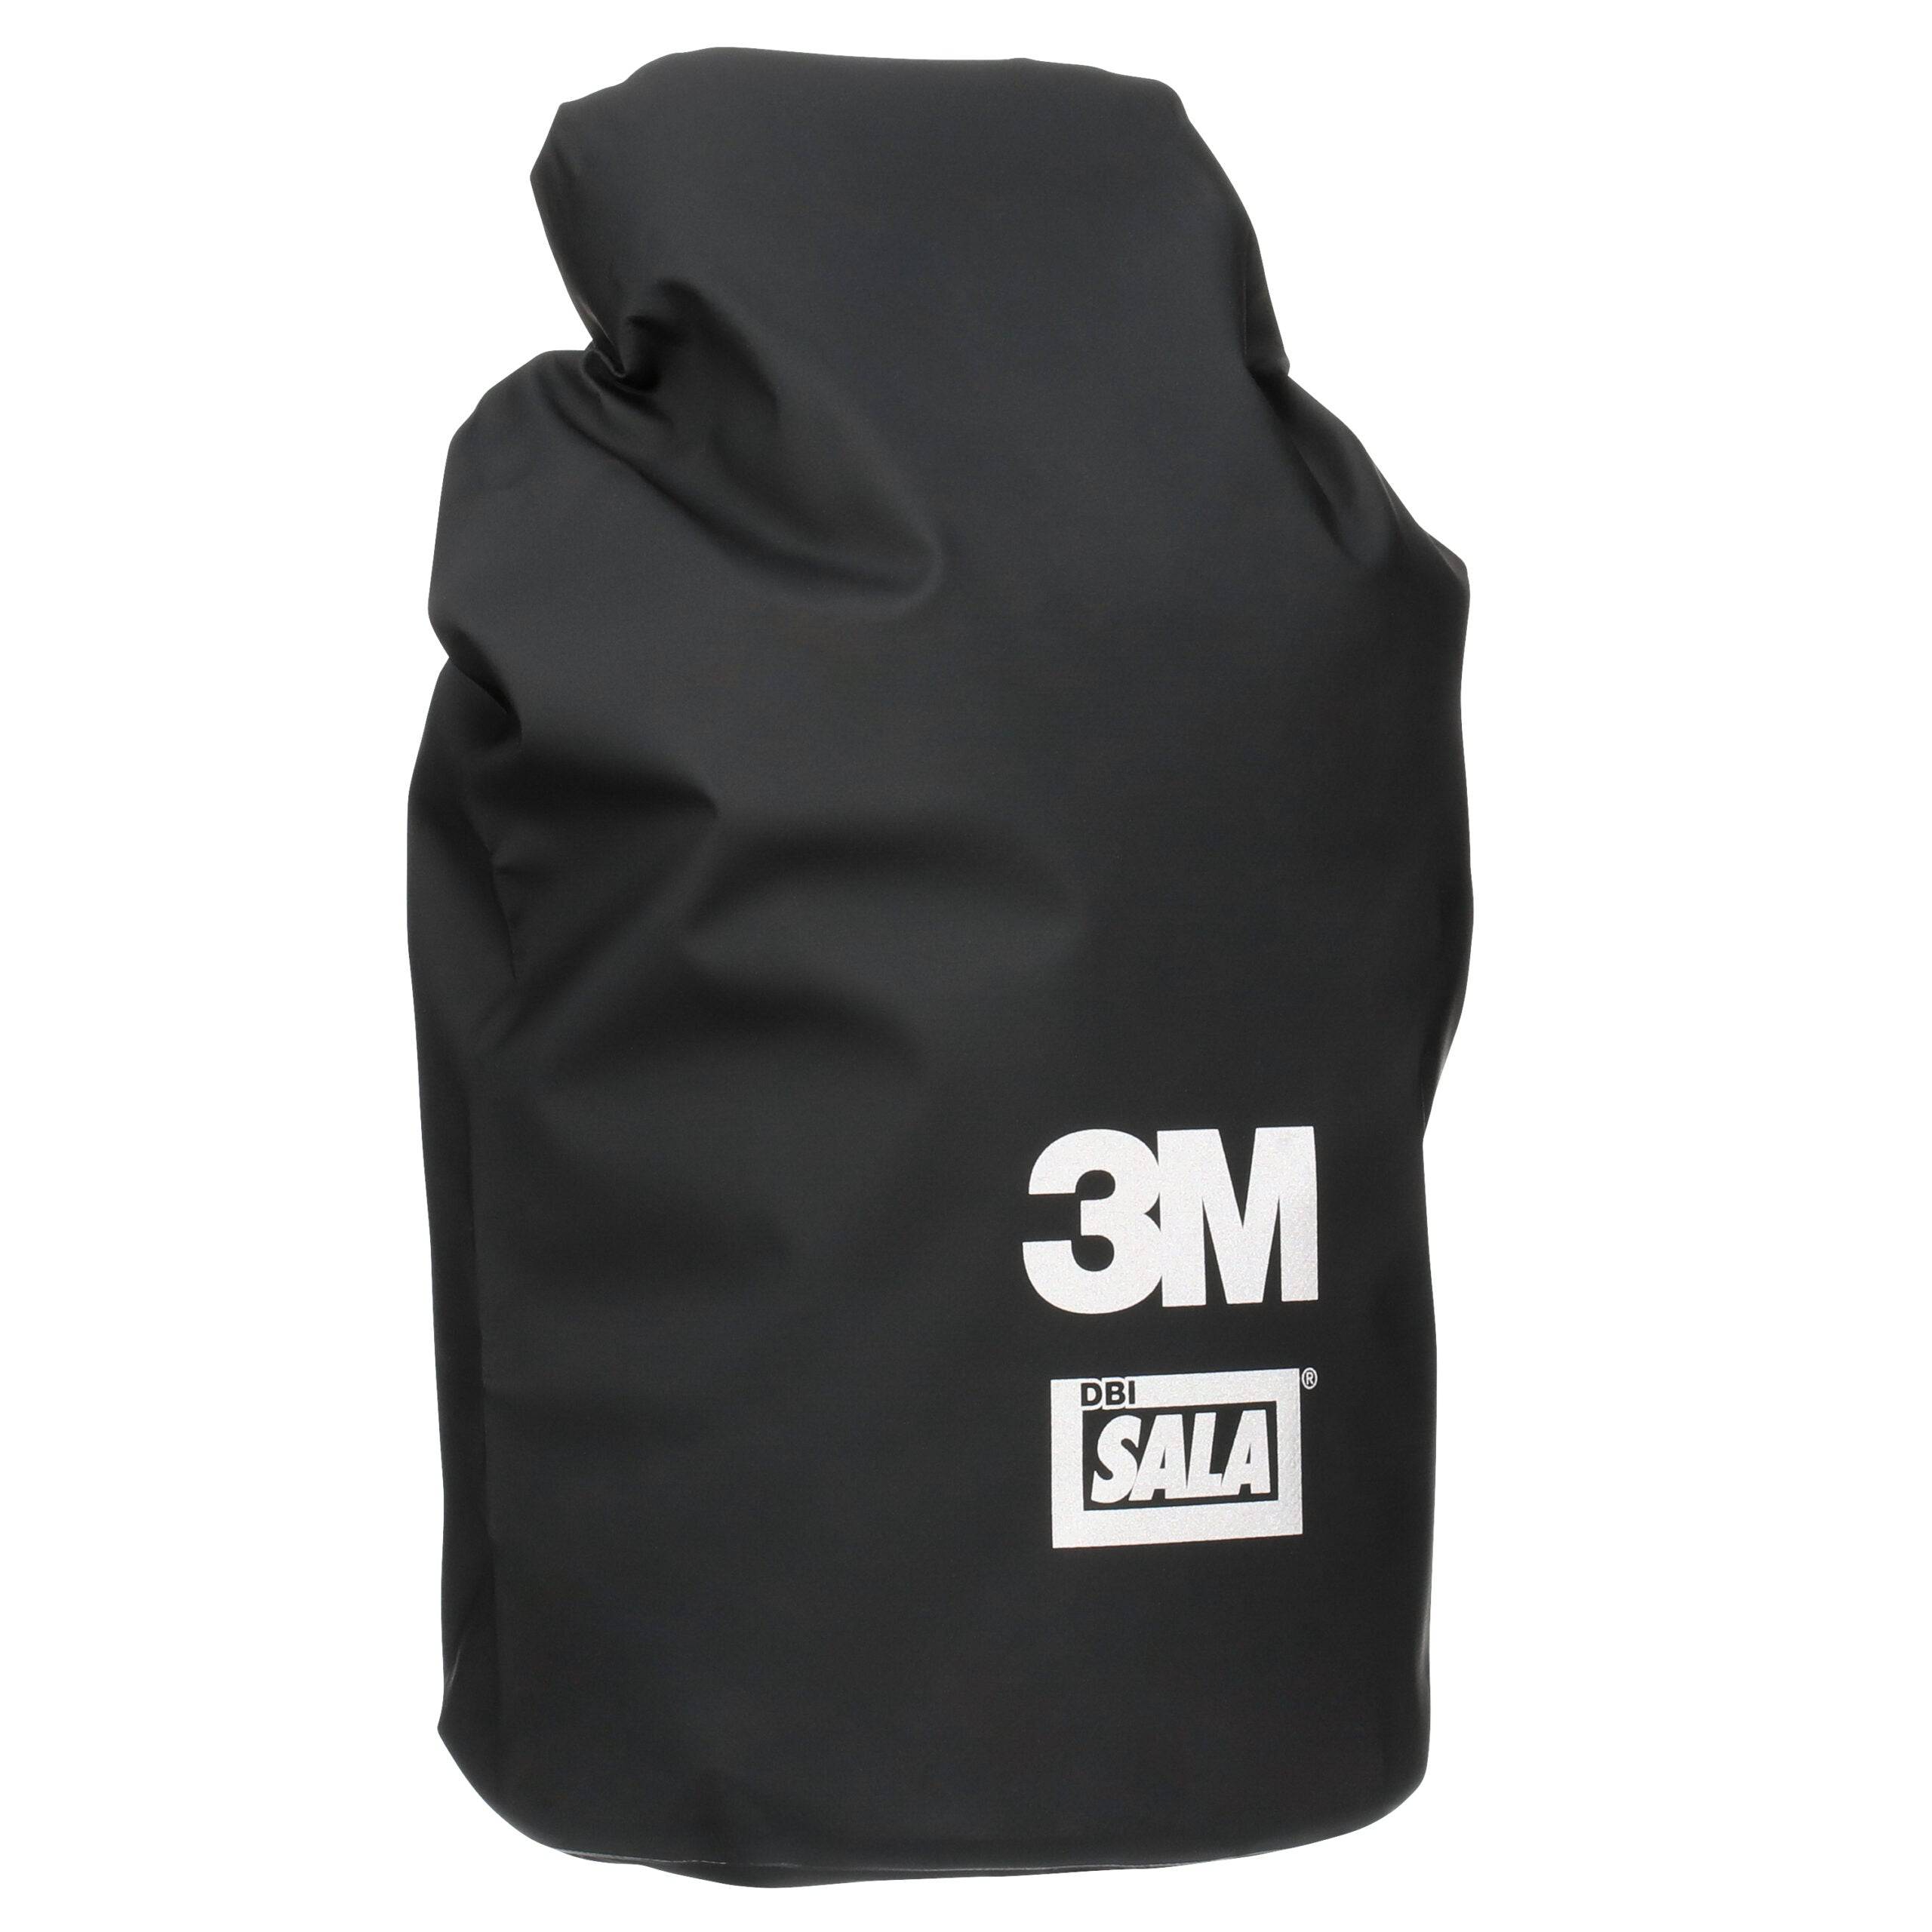 3M DBI SALA 20L Equipment Carrying and Storage Bag 9515749 - SecureHeights